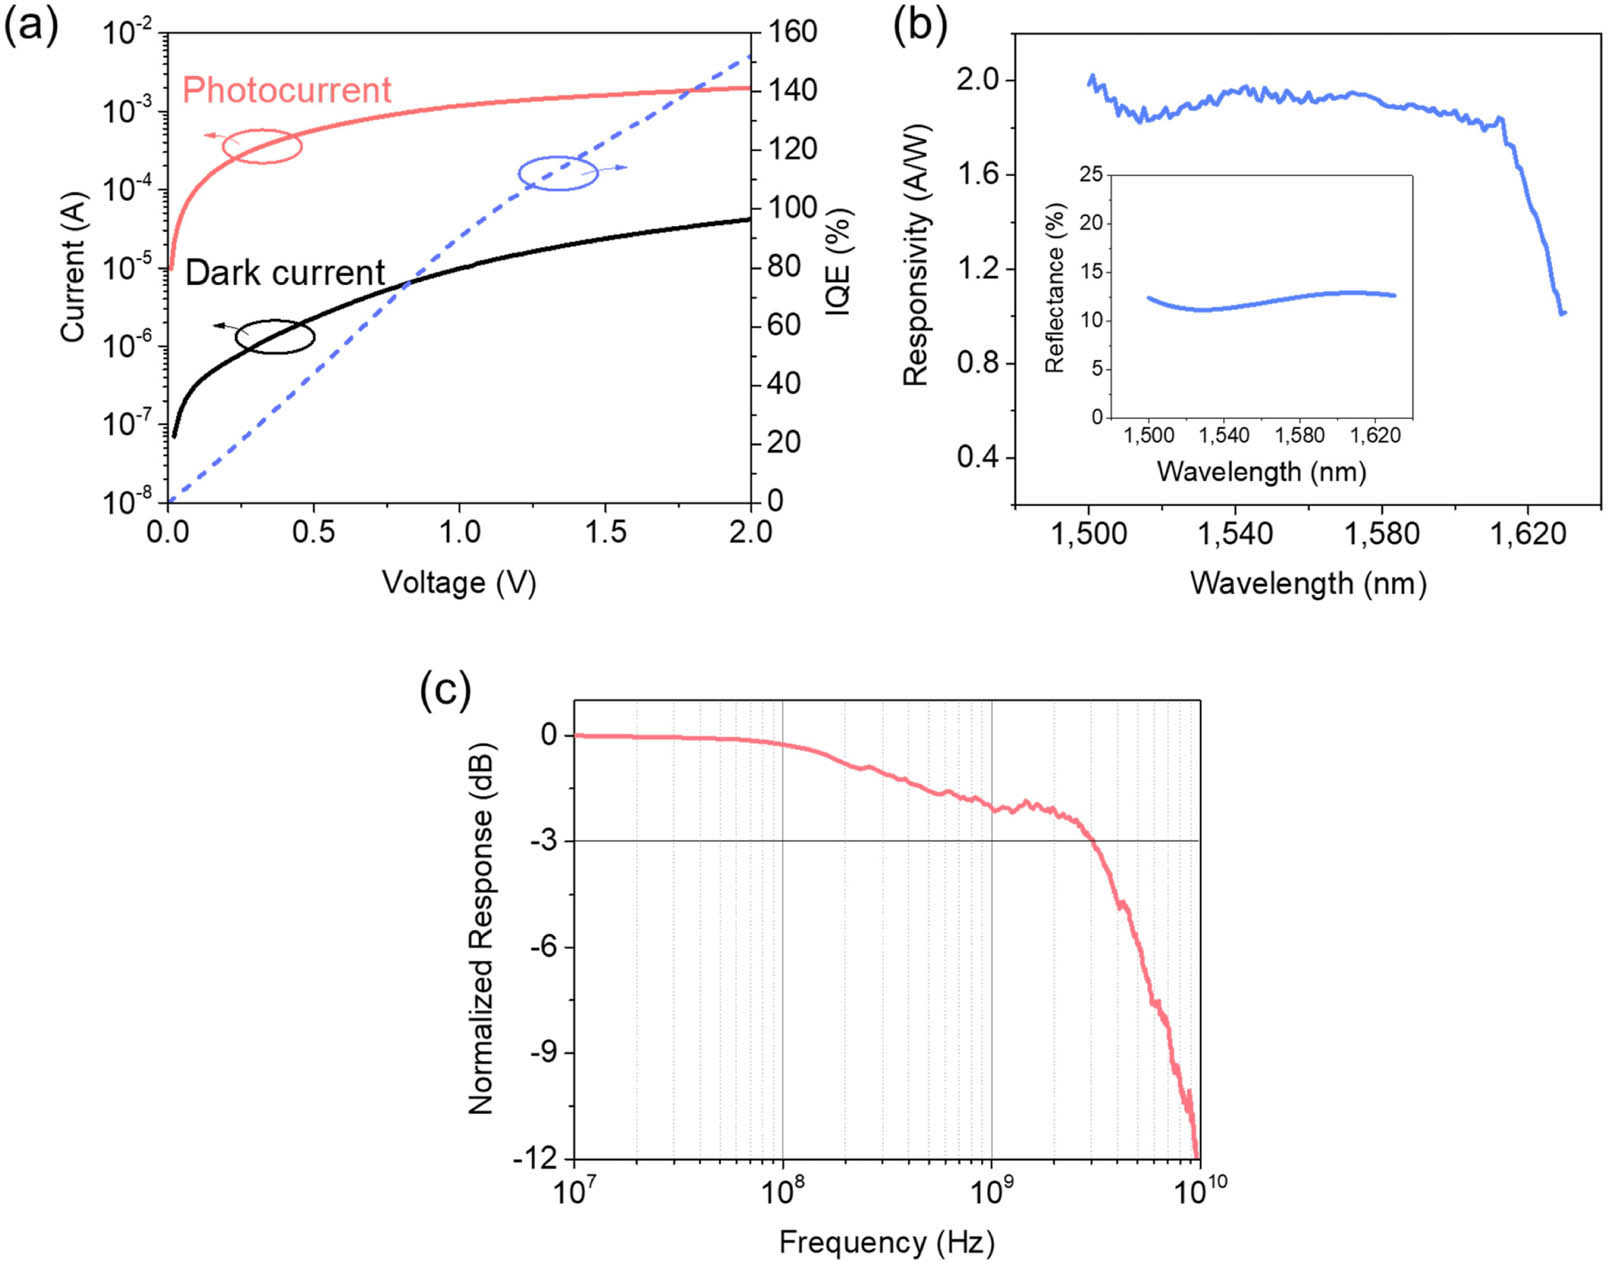 Characterization of the recess strained GOI MSM photodiodes. (a) Current-voltage (I-V) characteristics of the device without (black) and with (red) an incident power of ∼20 mW at 1550 nm. The corresponding internal quantum efficiency (IQE) is also calculated. (b) Responsivity spectrum of the device from 1500 to 1630 nm. Inset shows the calculated average surface reflectance of the device. (c) Measured frequency response of the device at 2 V.